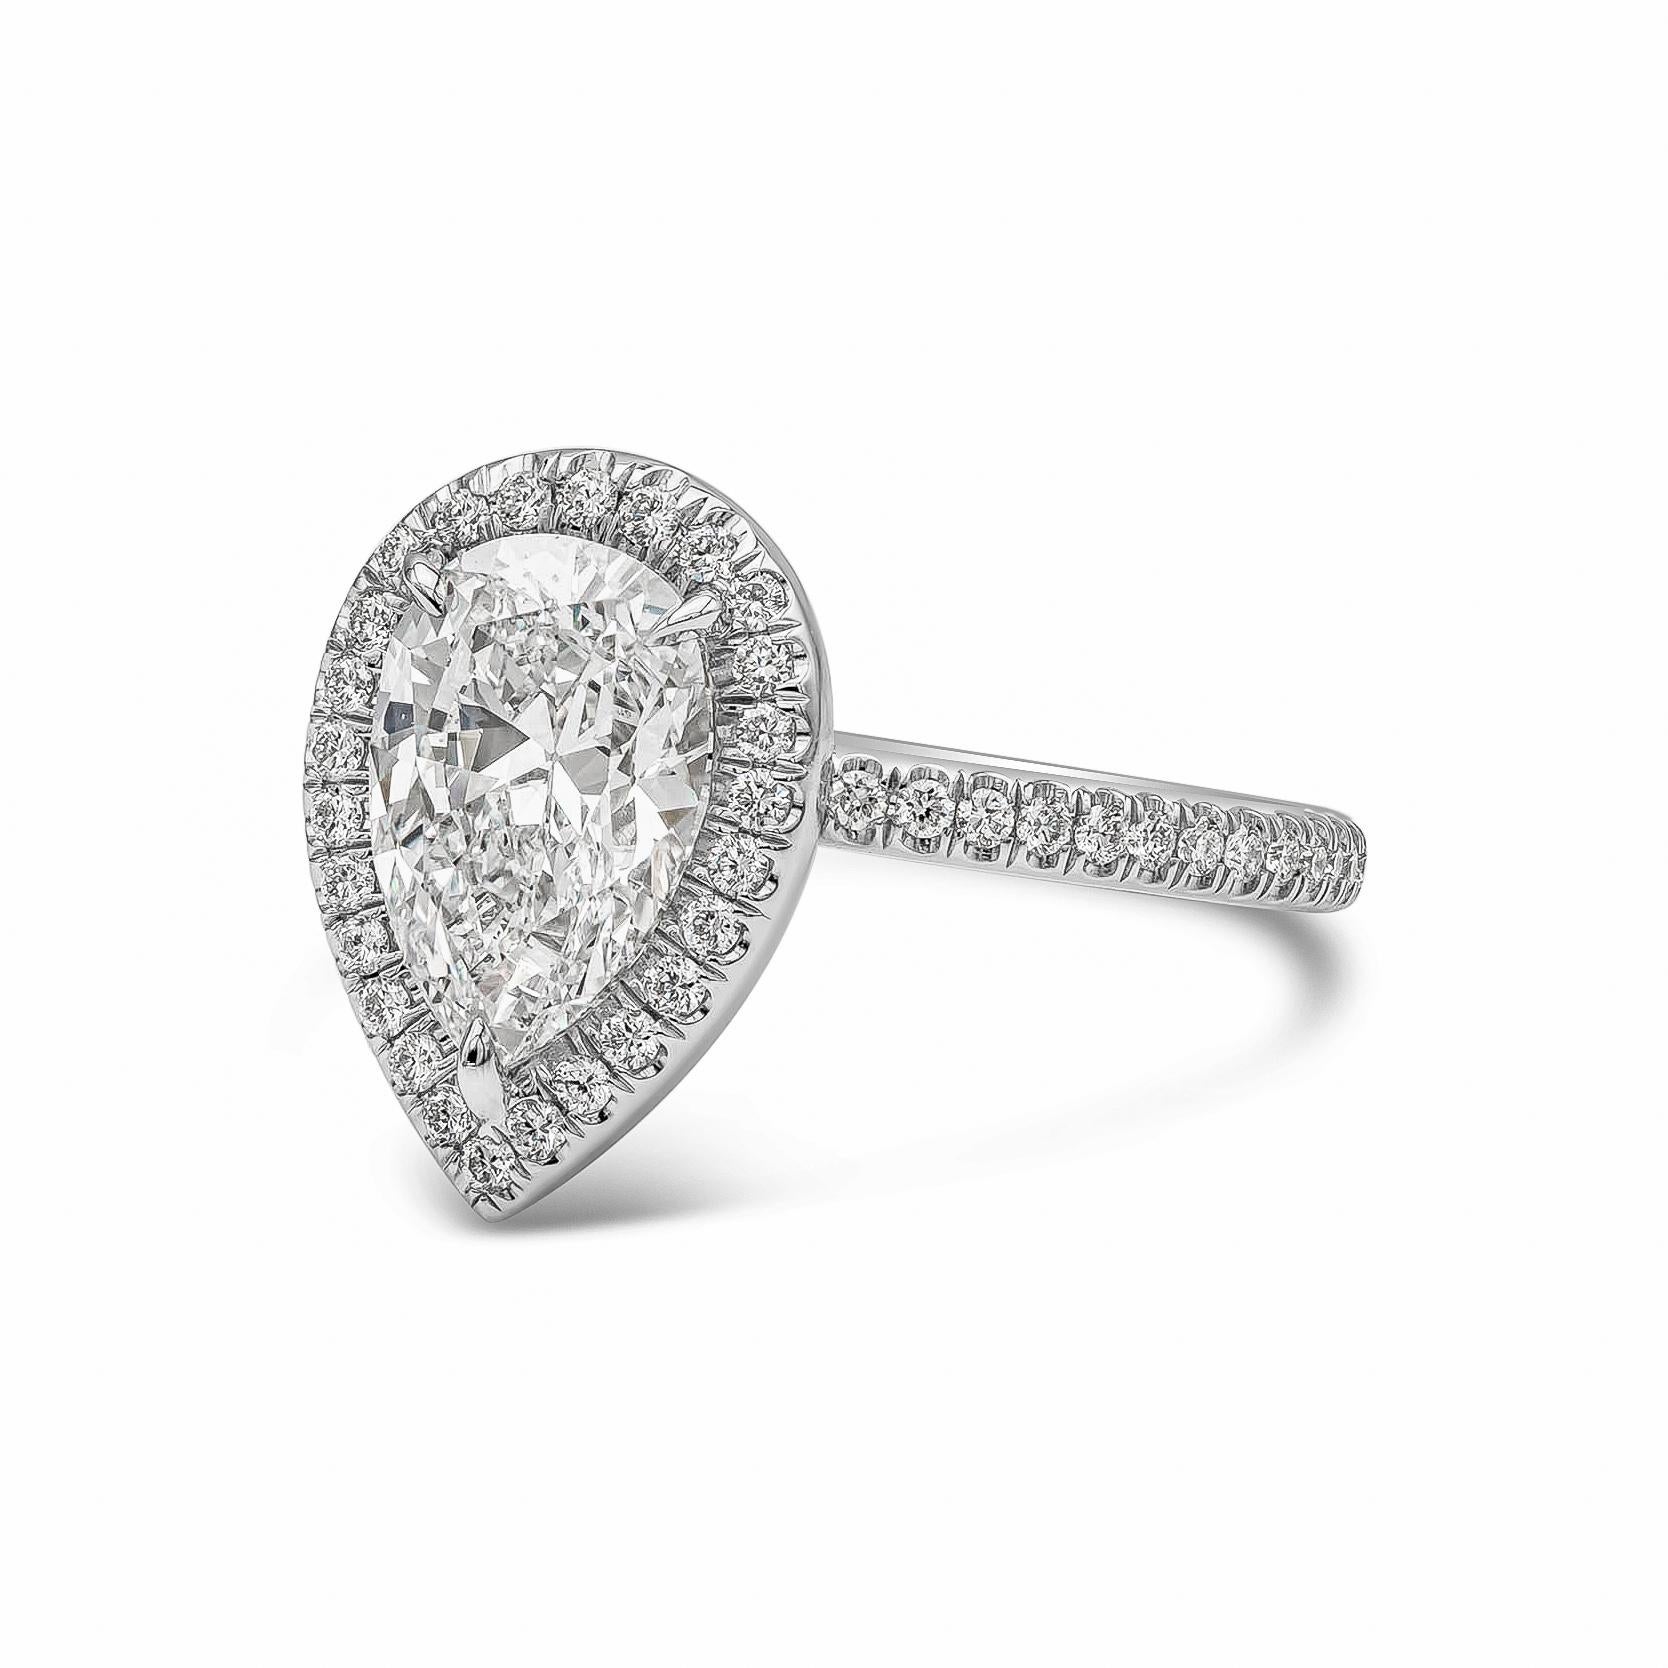 A timeless engagement ring style showcasing a 1.89 carats elongated pear shape diamond certified by GIA Certified as G color and SI1 in clarity. Center stone is set in a halo brilliant diamond setting. Shank is finely made in polished platinum